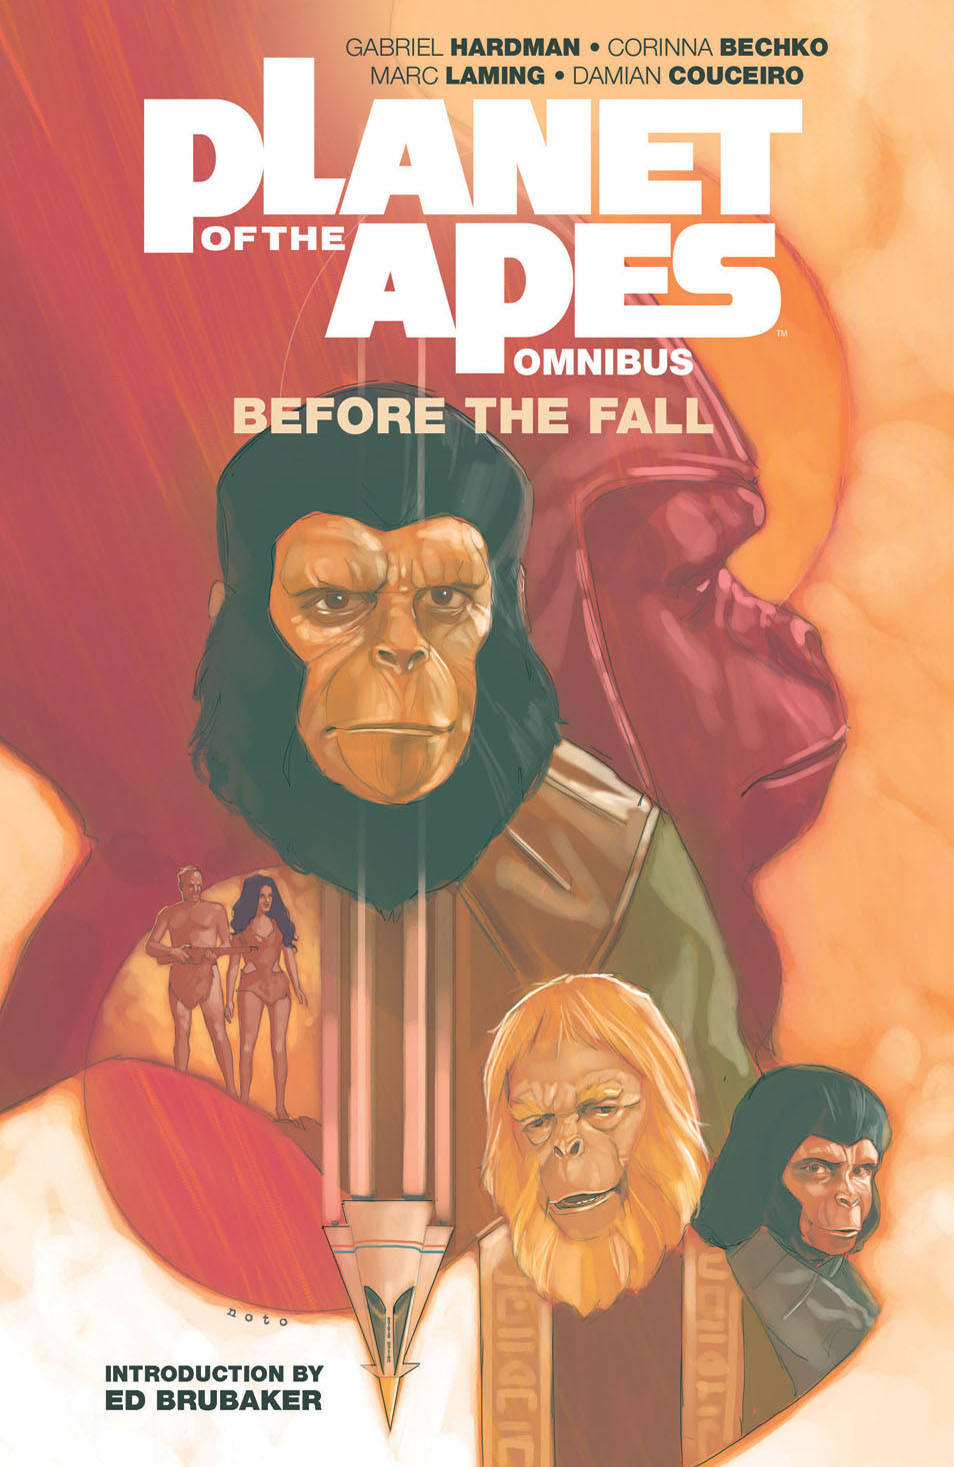 This image is the cover for the book Planet of the Apes: Before the Fall Omnibus, Planet of the Apes